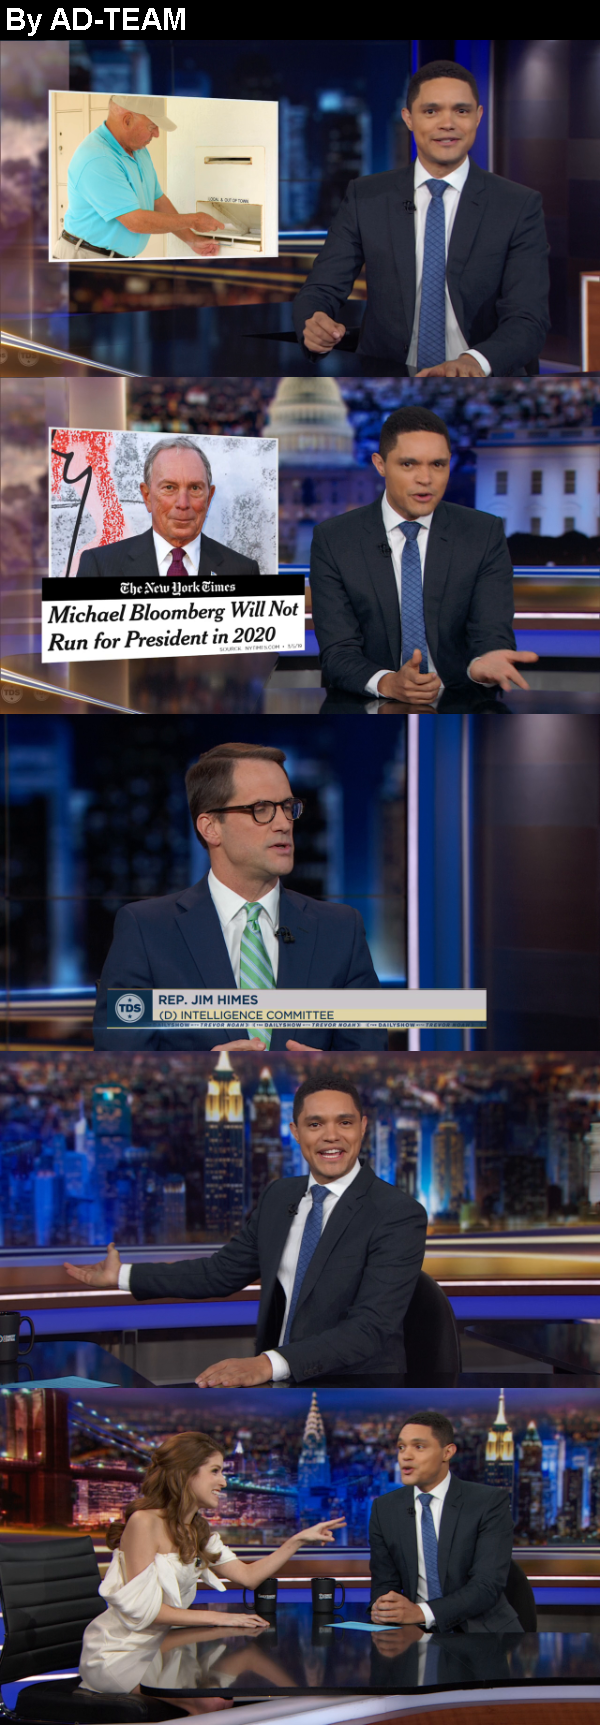 The Daily Show 2019 11 11 Jim Himes EXTENDED 720p WEB x264 TBS